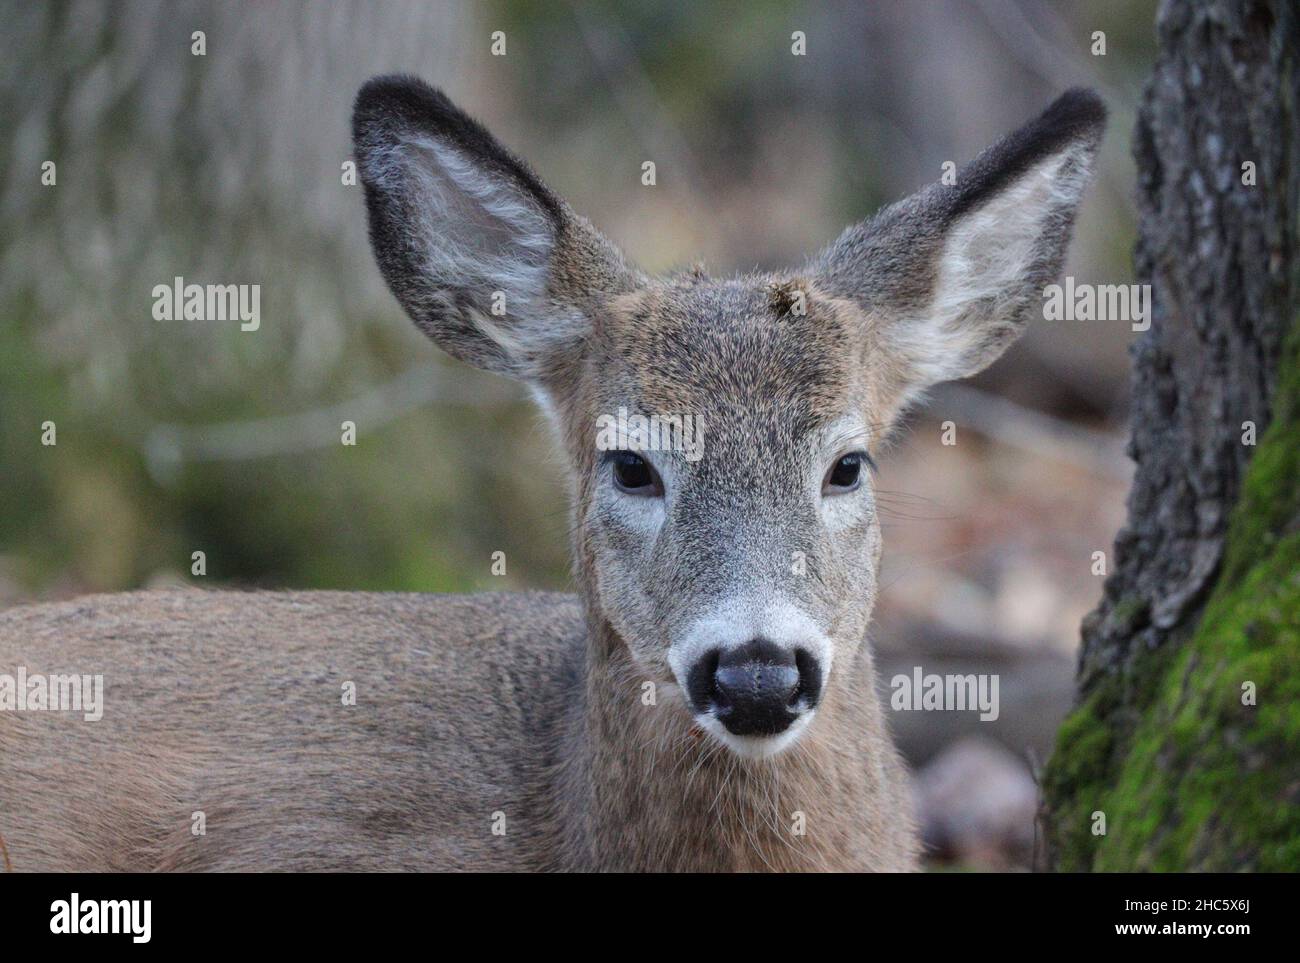 Portrait of a cute, brown deer with a blurred background Stock Photo